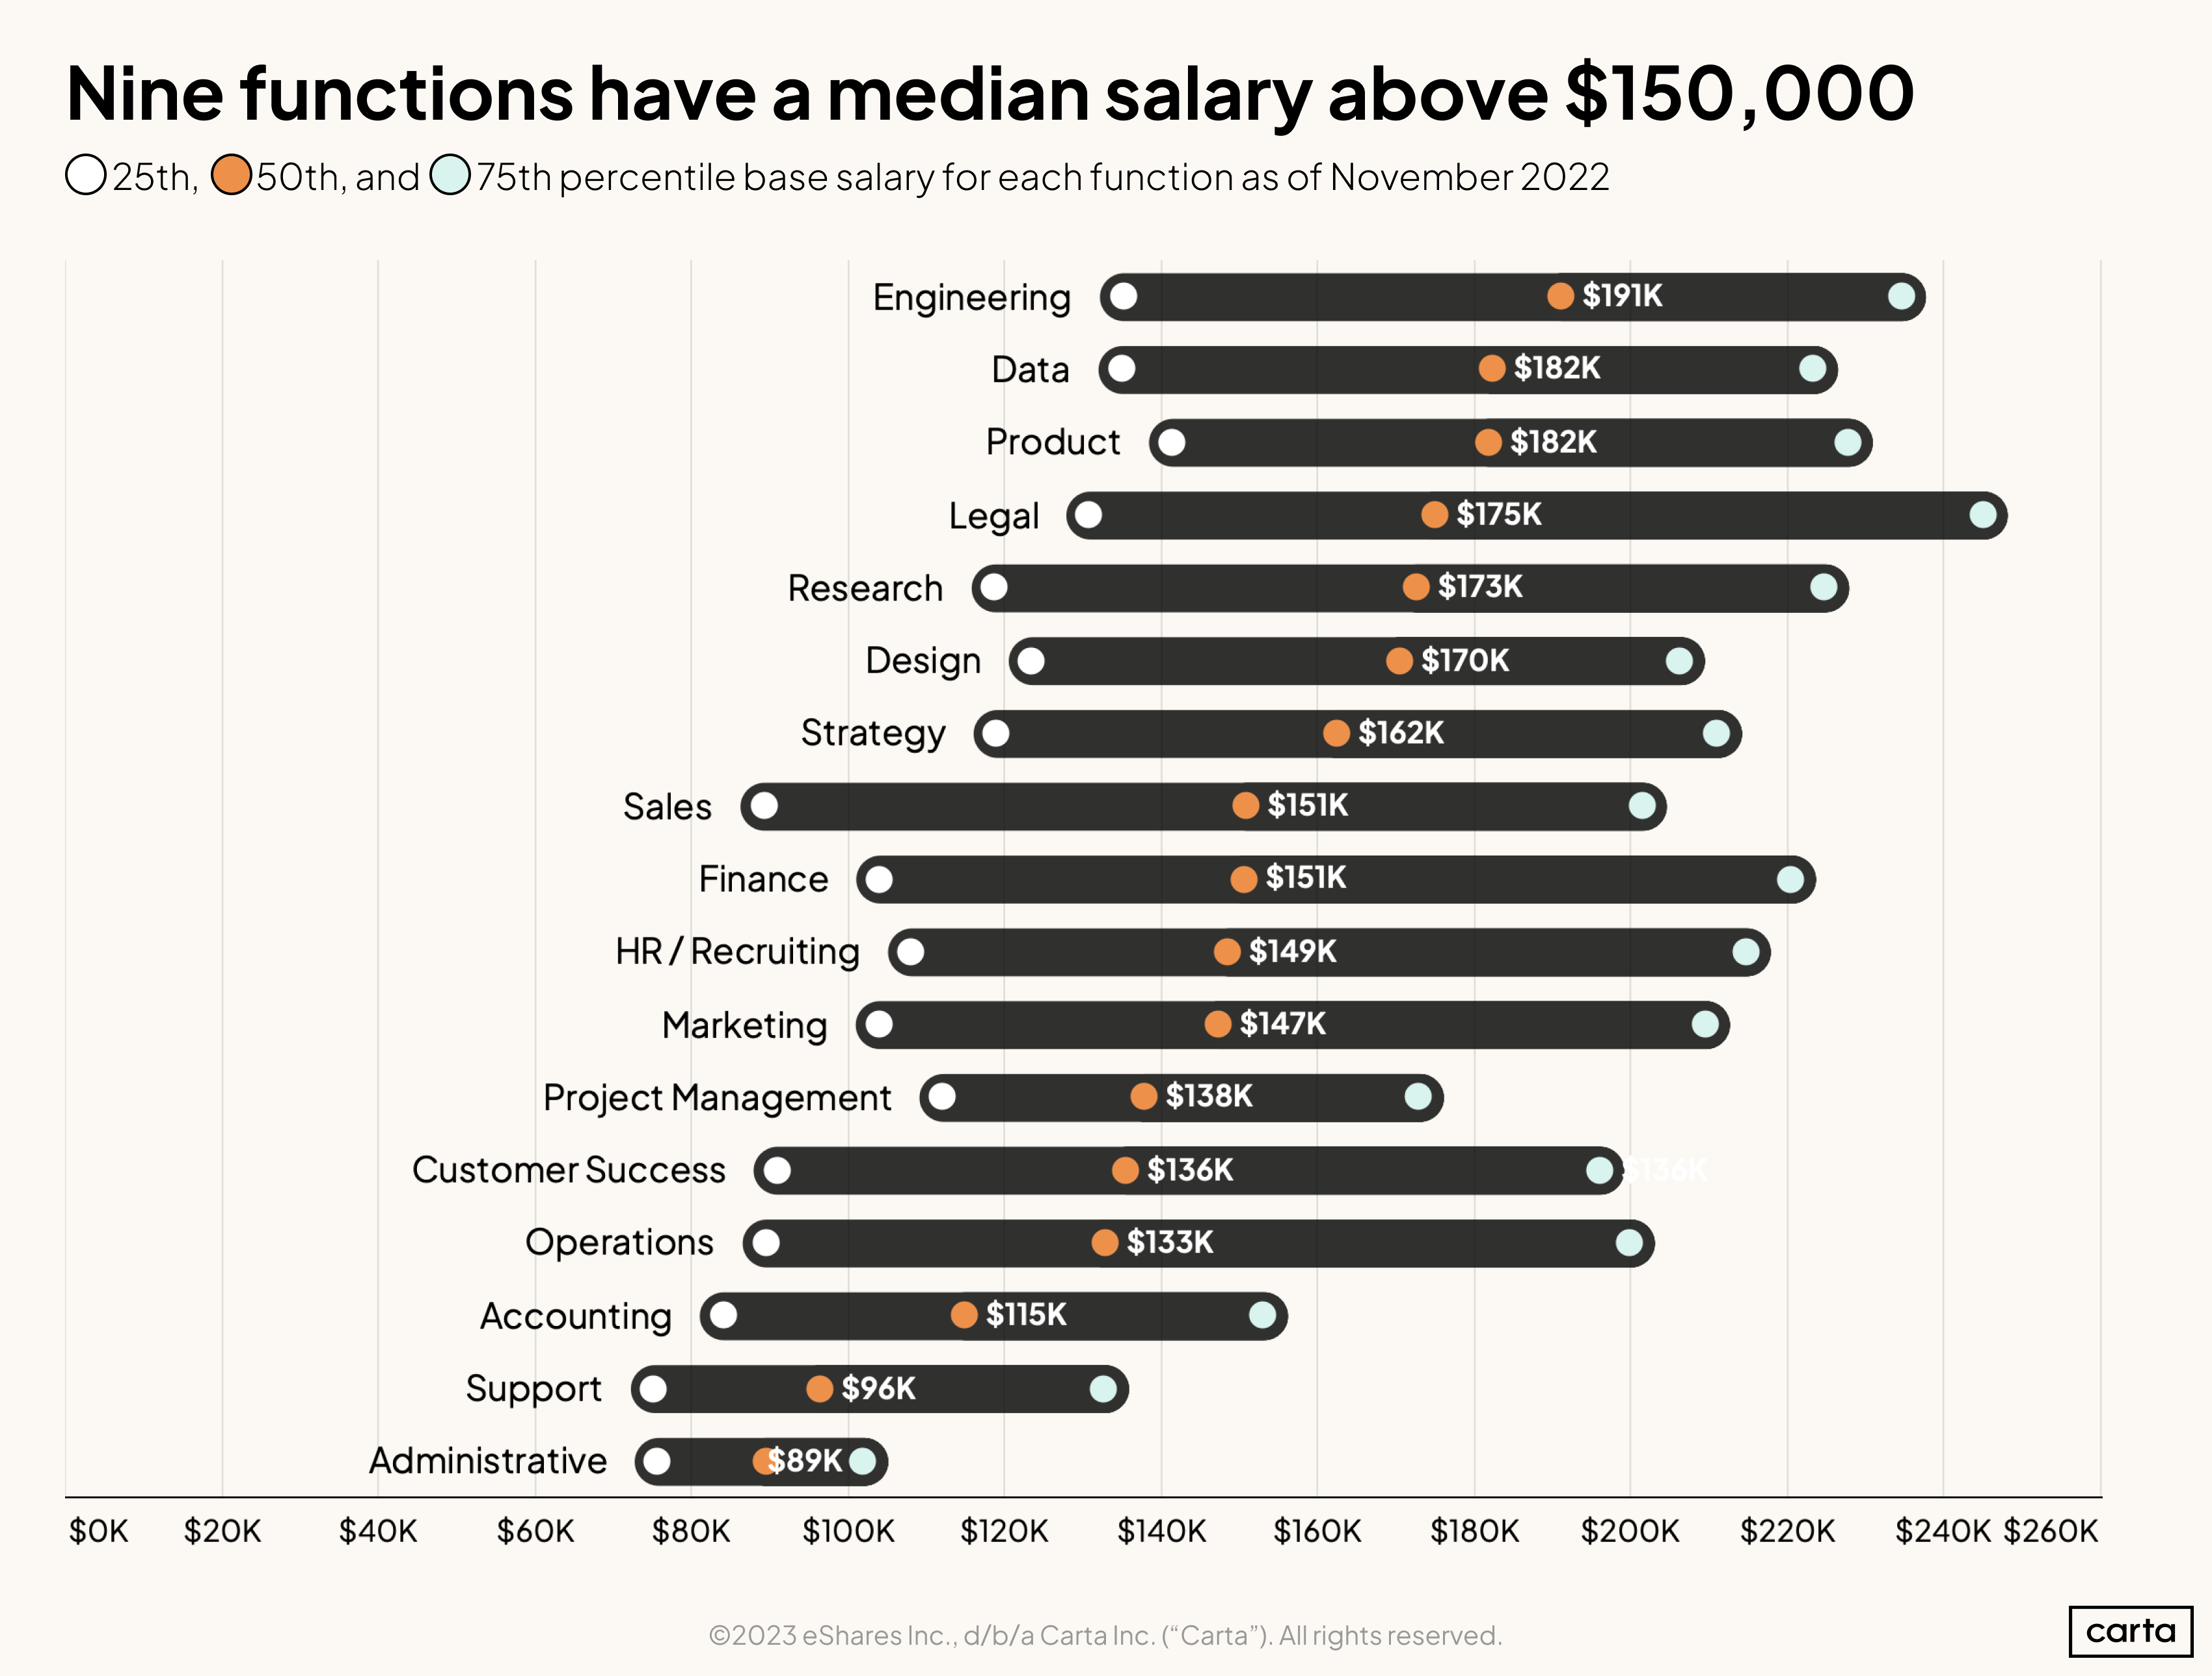 Median salary by function